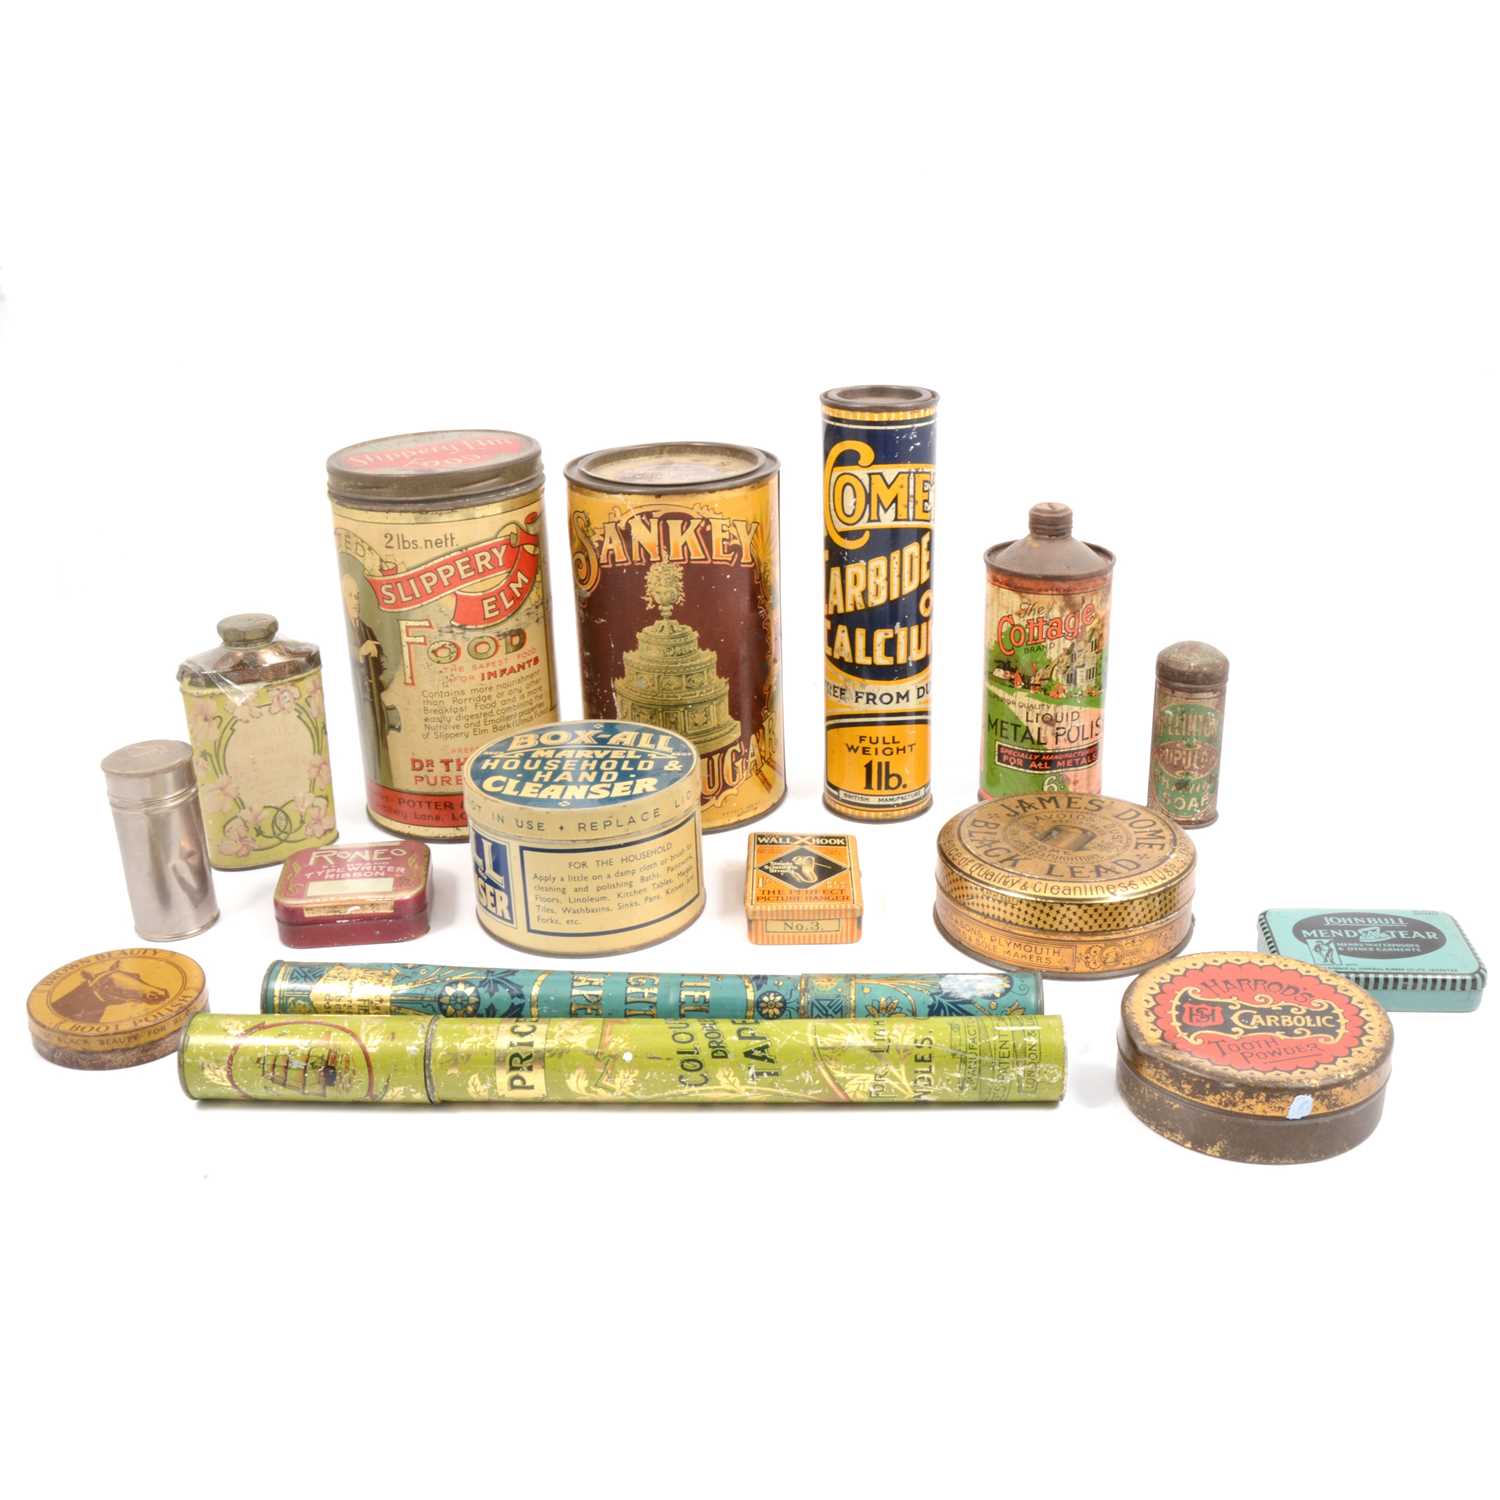 Lot 132 - A selection of mostly early 20th century home product and household tins